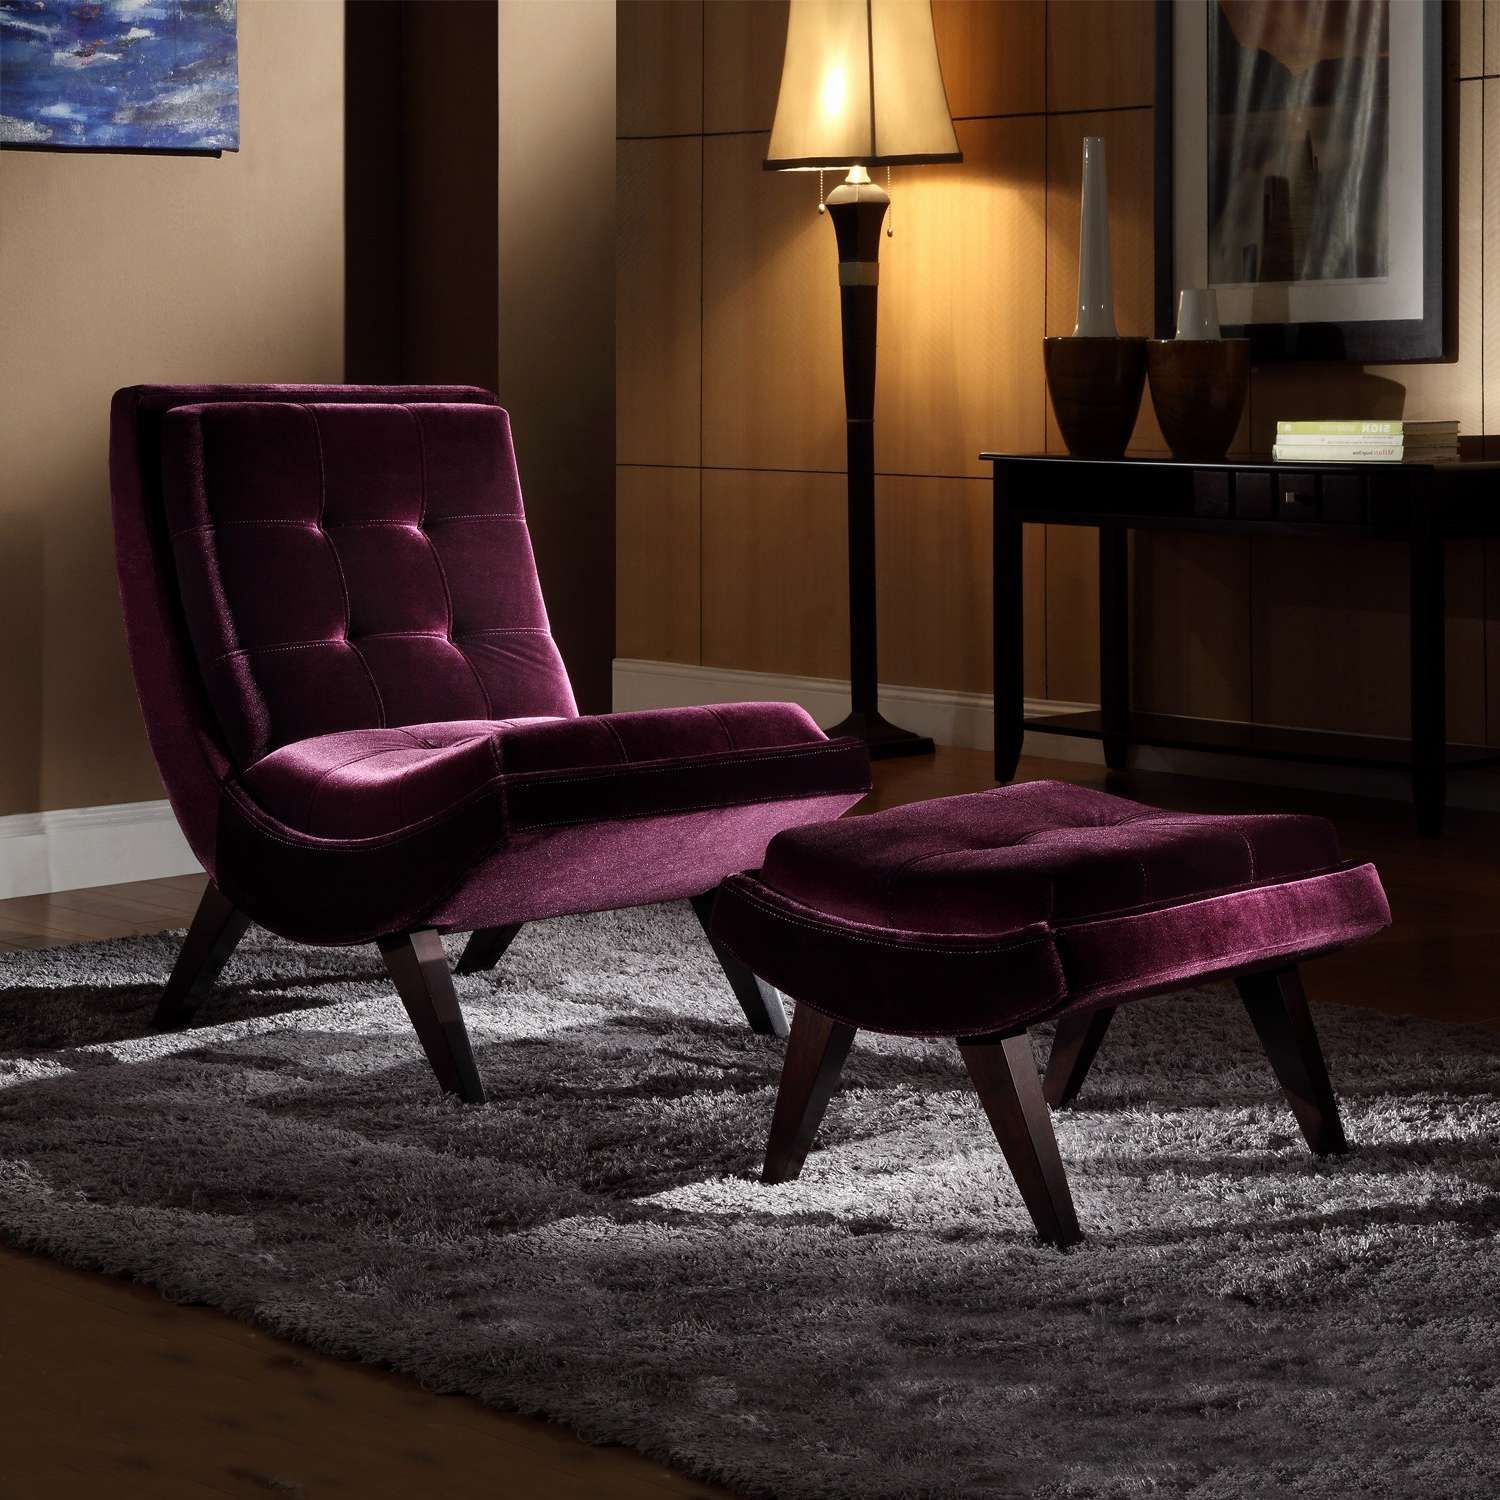 Most Current Purple Ottoman Coffee Tables Pertaining To Purple Coffee Table Best Of Sofa Ottoman Coffee Table Purple (View 9 of 20)